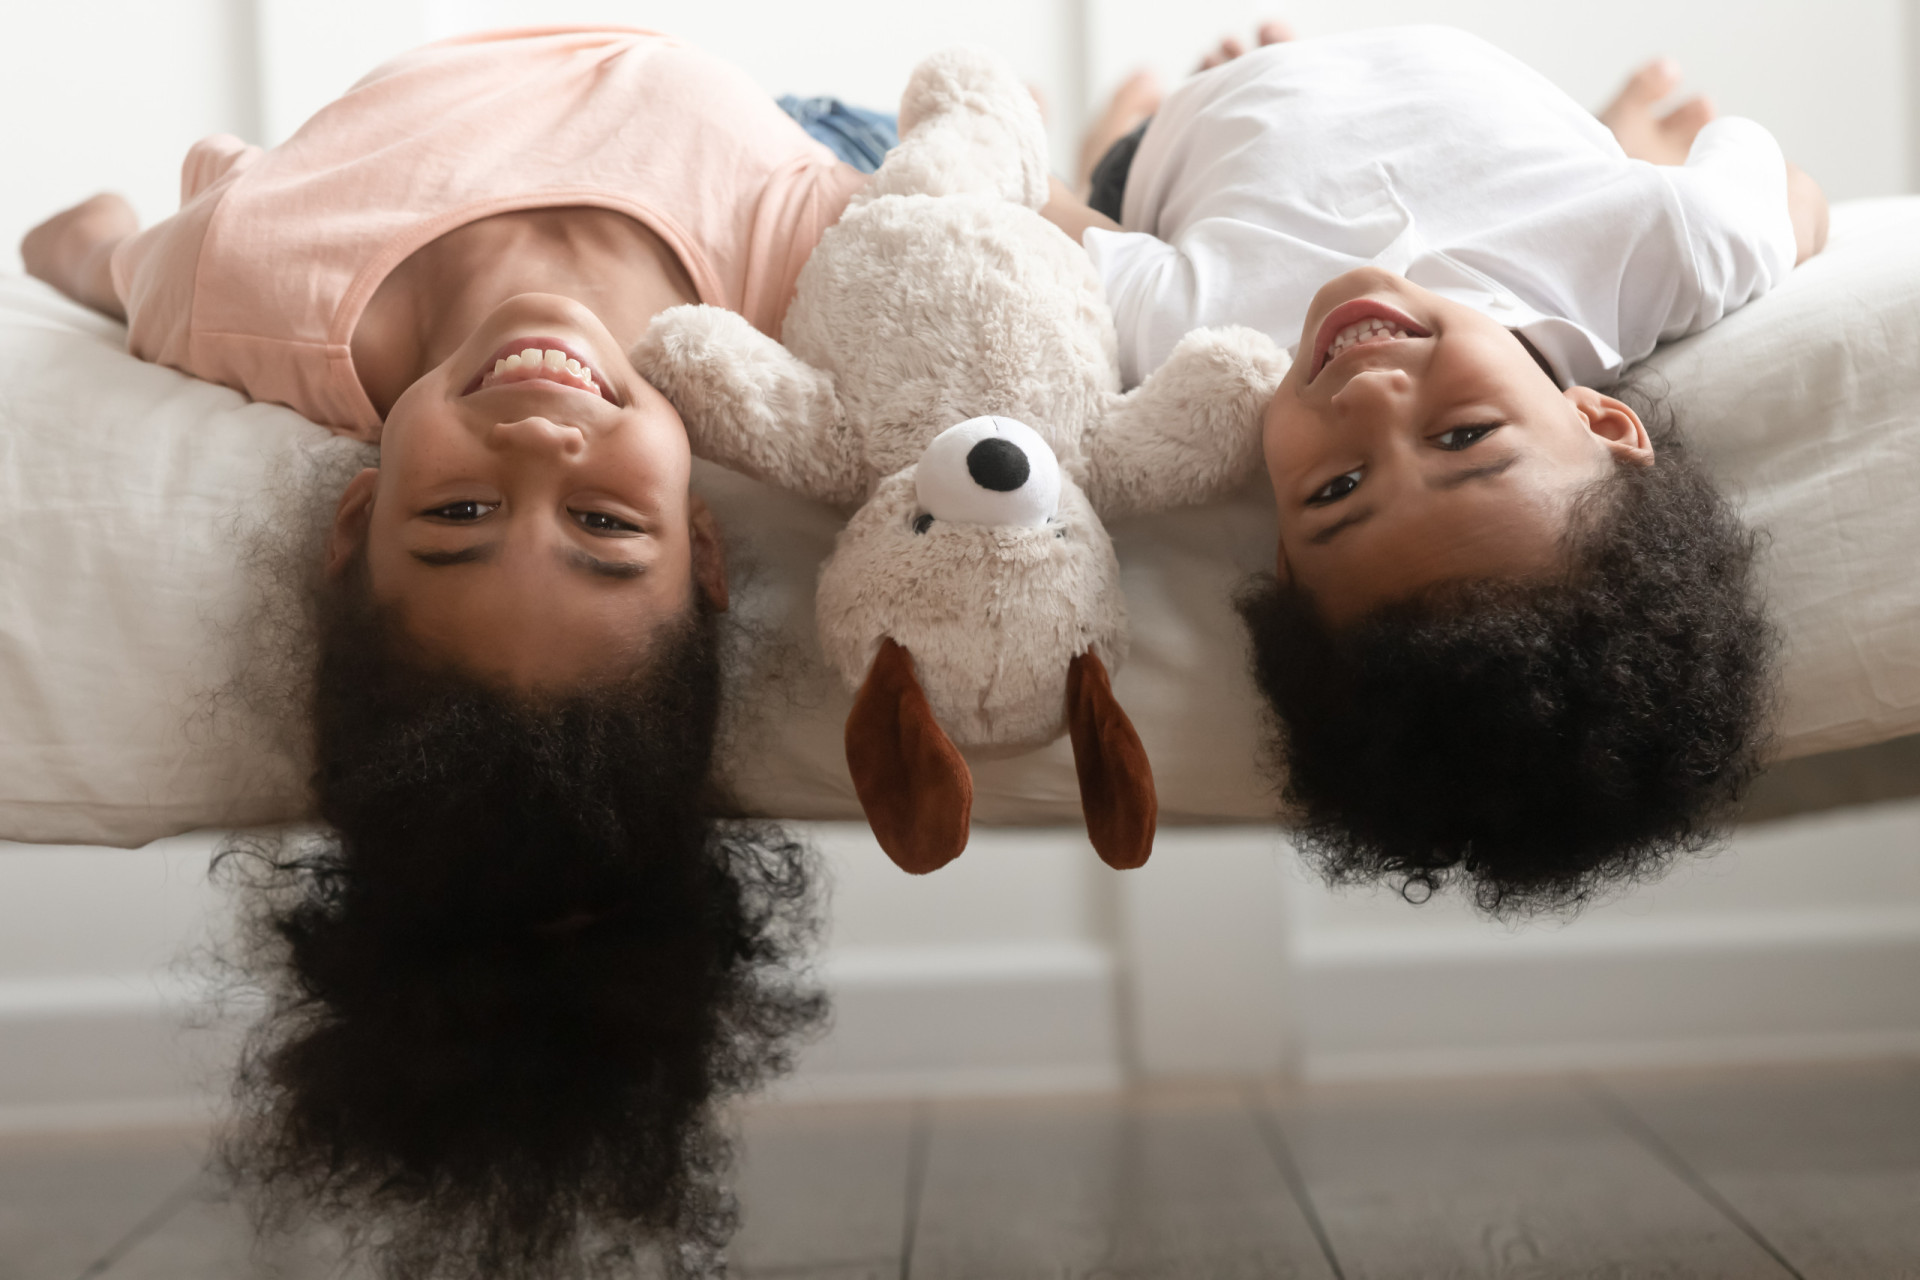 <p>Mixed sibling relationships tend to have less sibling rivalry than that associated with same-sex siblings, but, again, this can vary.</p><p>You may also like:<a href="https://www.starsinsider.com/n/184260?utm_source=msn.com&utm_medium=display&utm_campaign=referral_description&utm_content=675857en-us"> Gun control laws: celebrities who are either for or against stricter legislation</a></p>